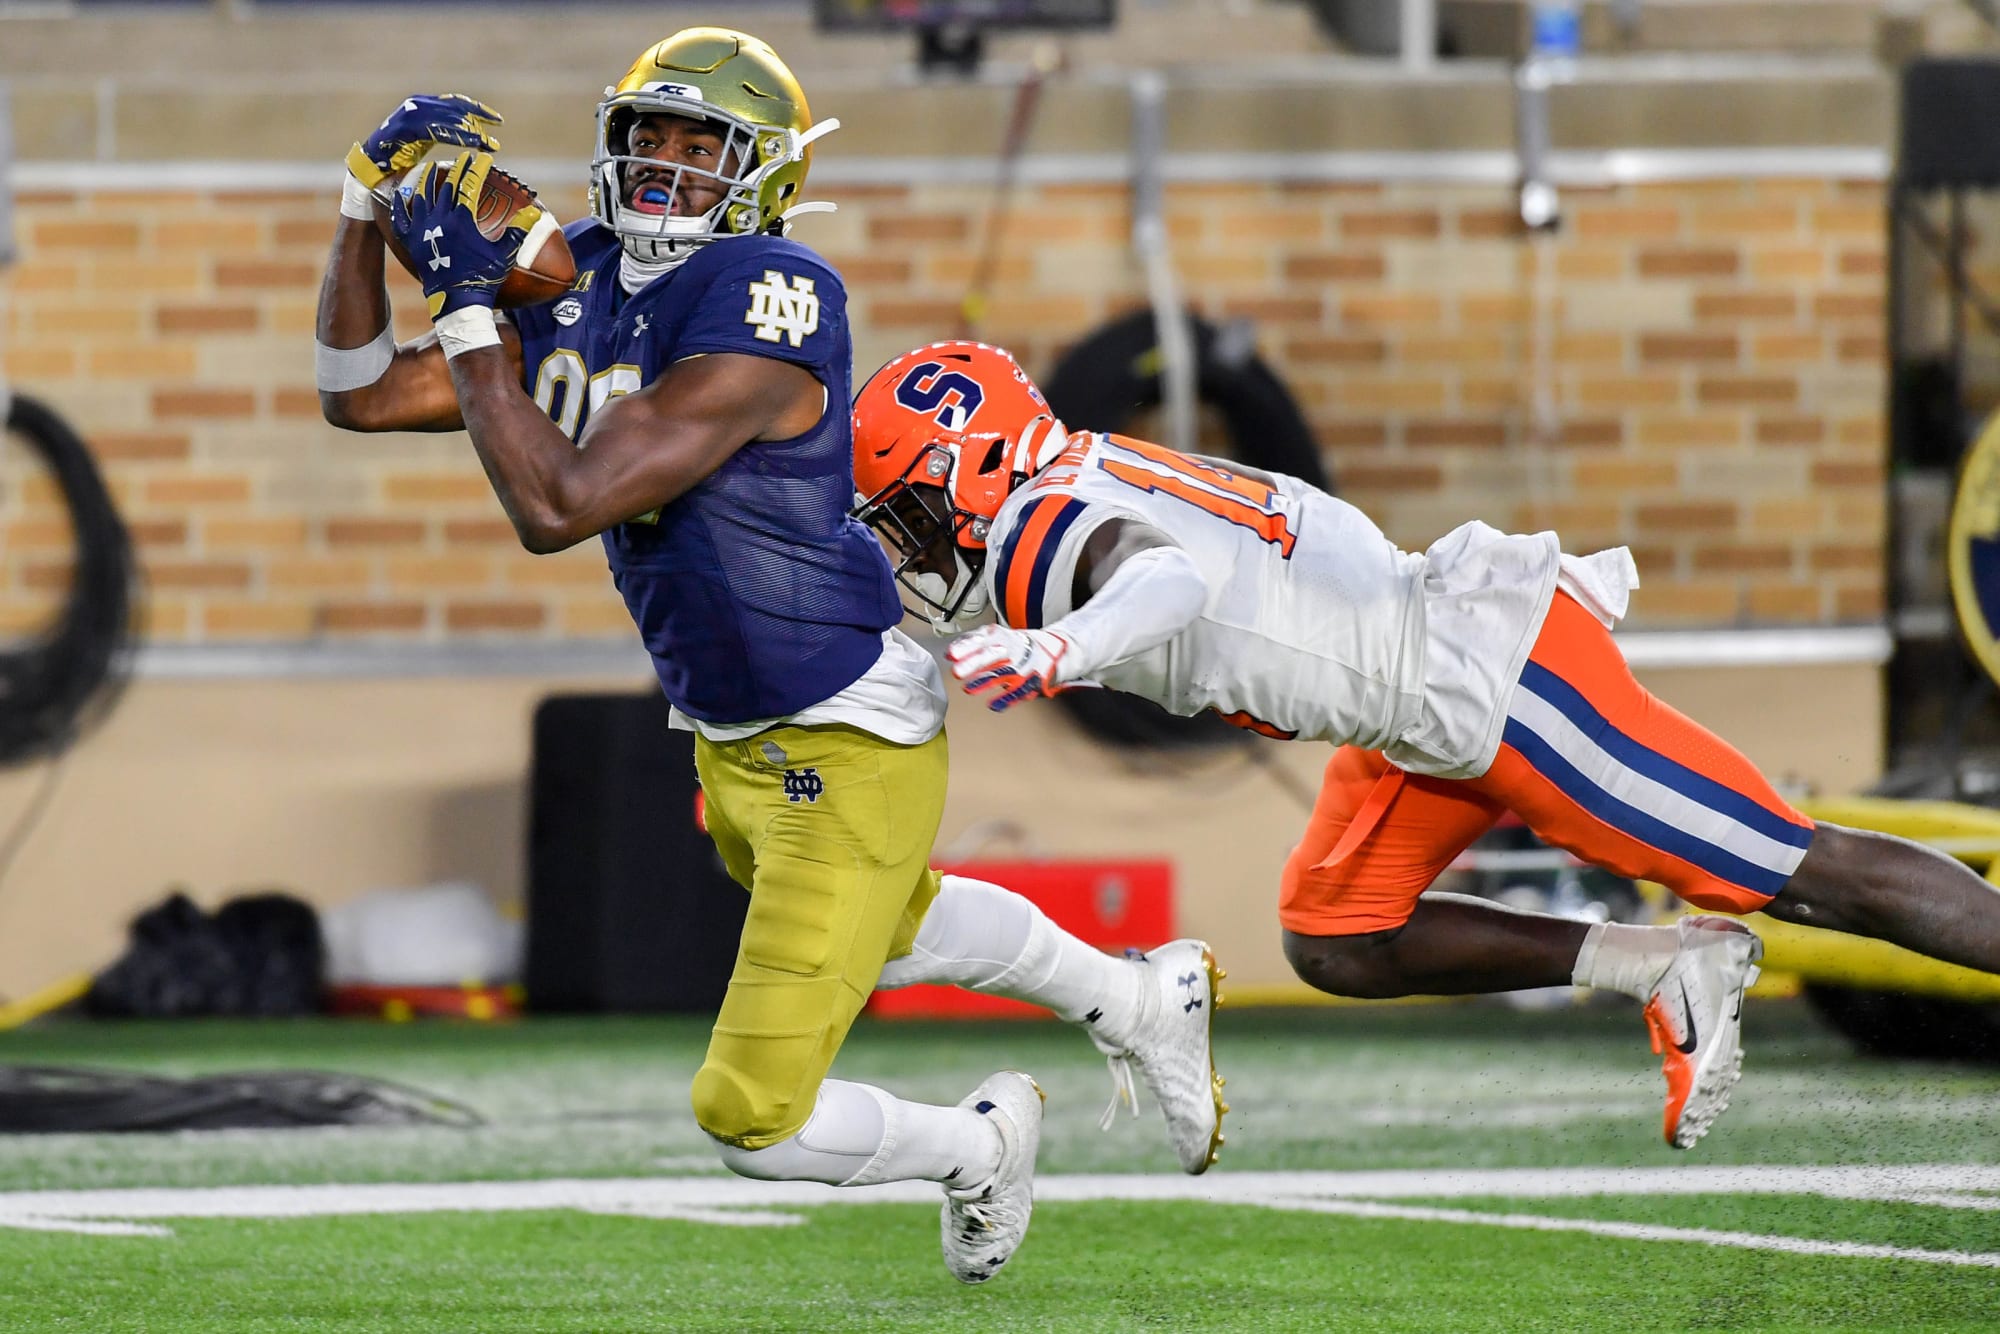 Trio of Notre Dame football players named ACC Players of the Week